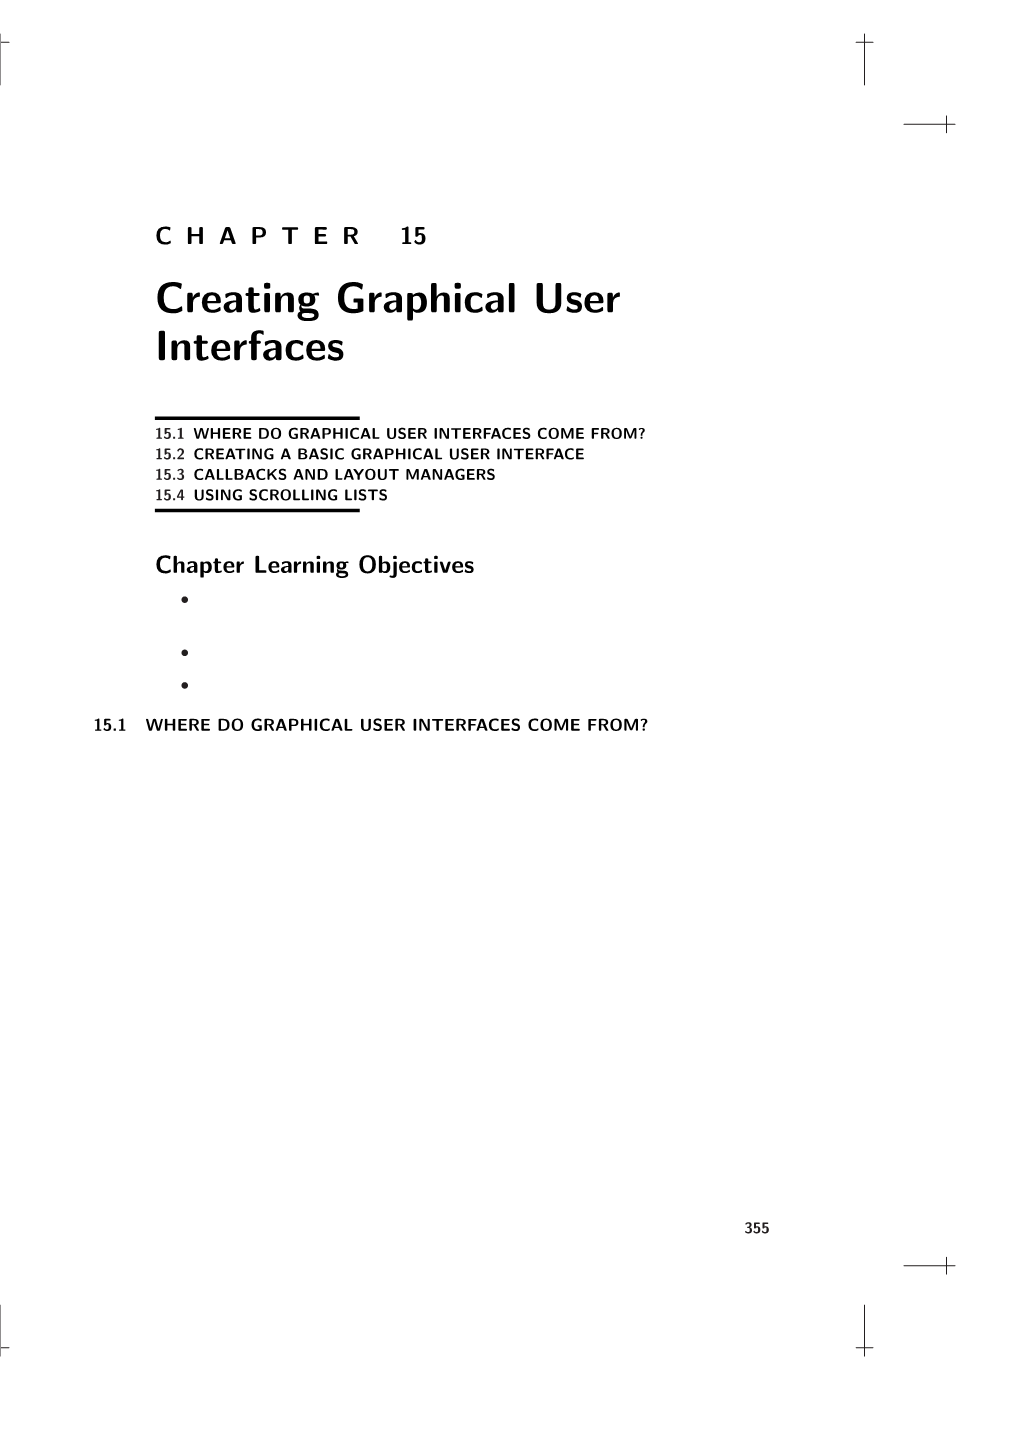 Creating Graphical User Interfaces